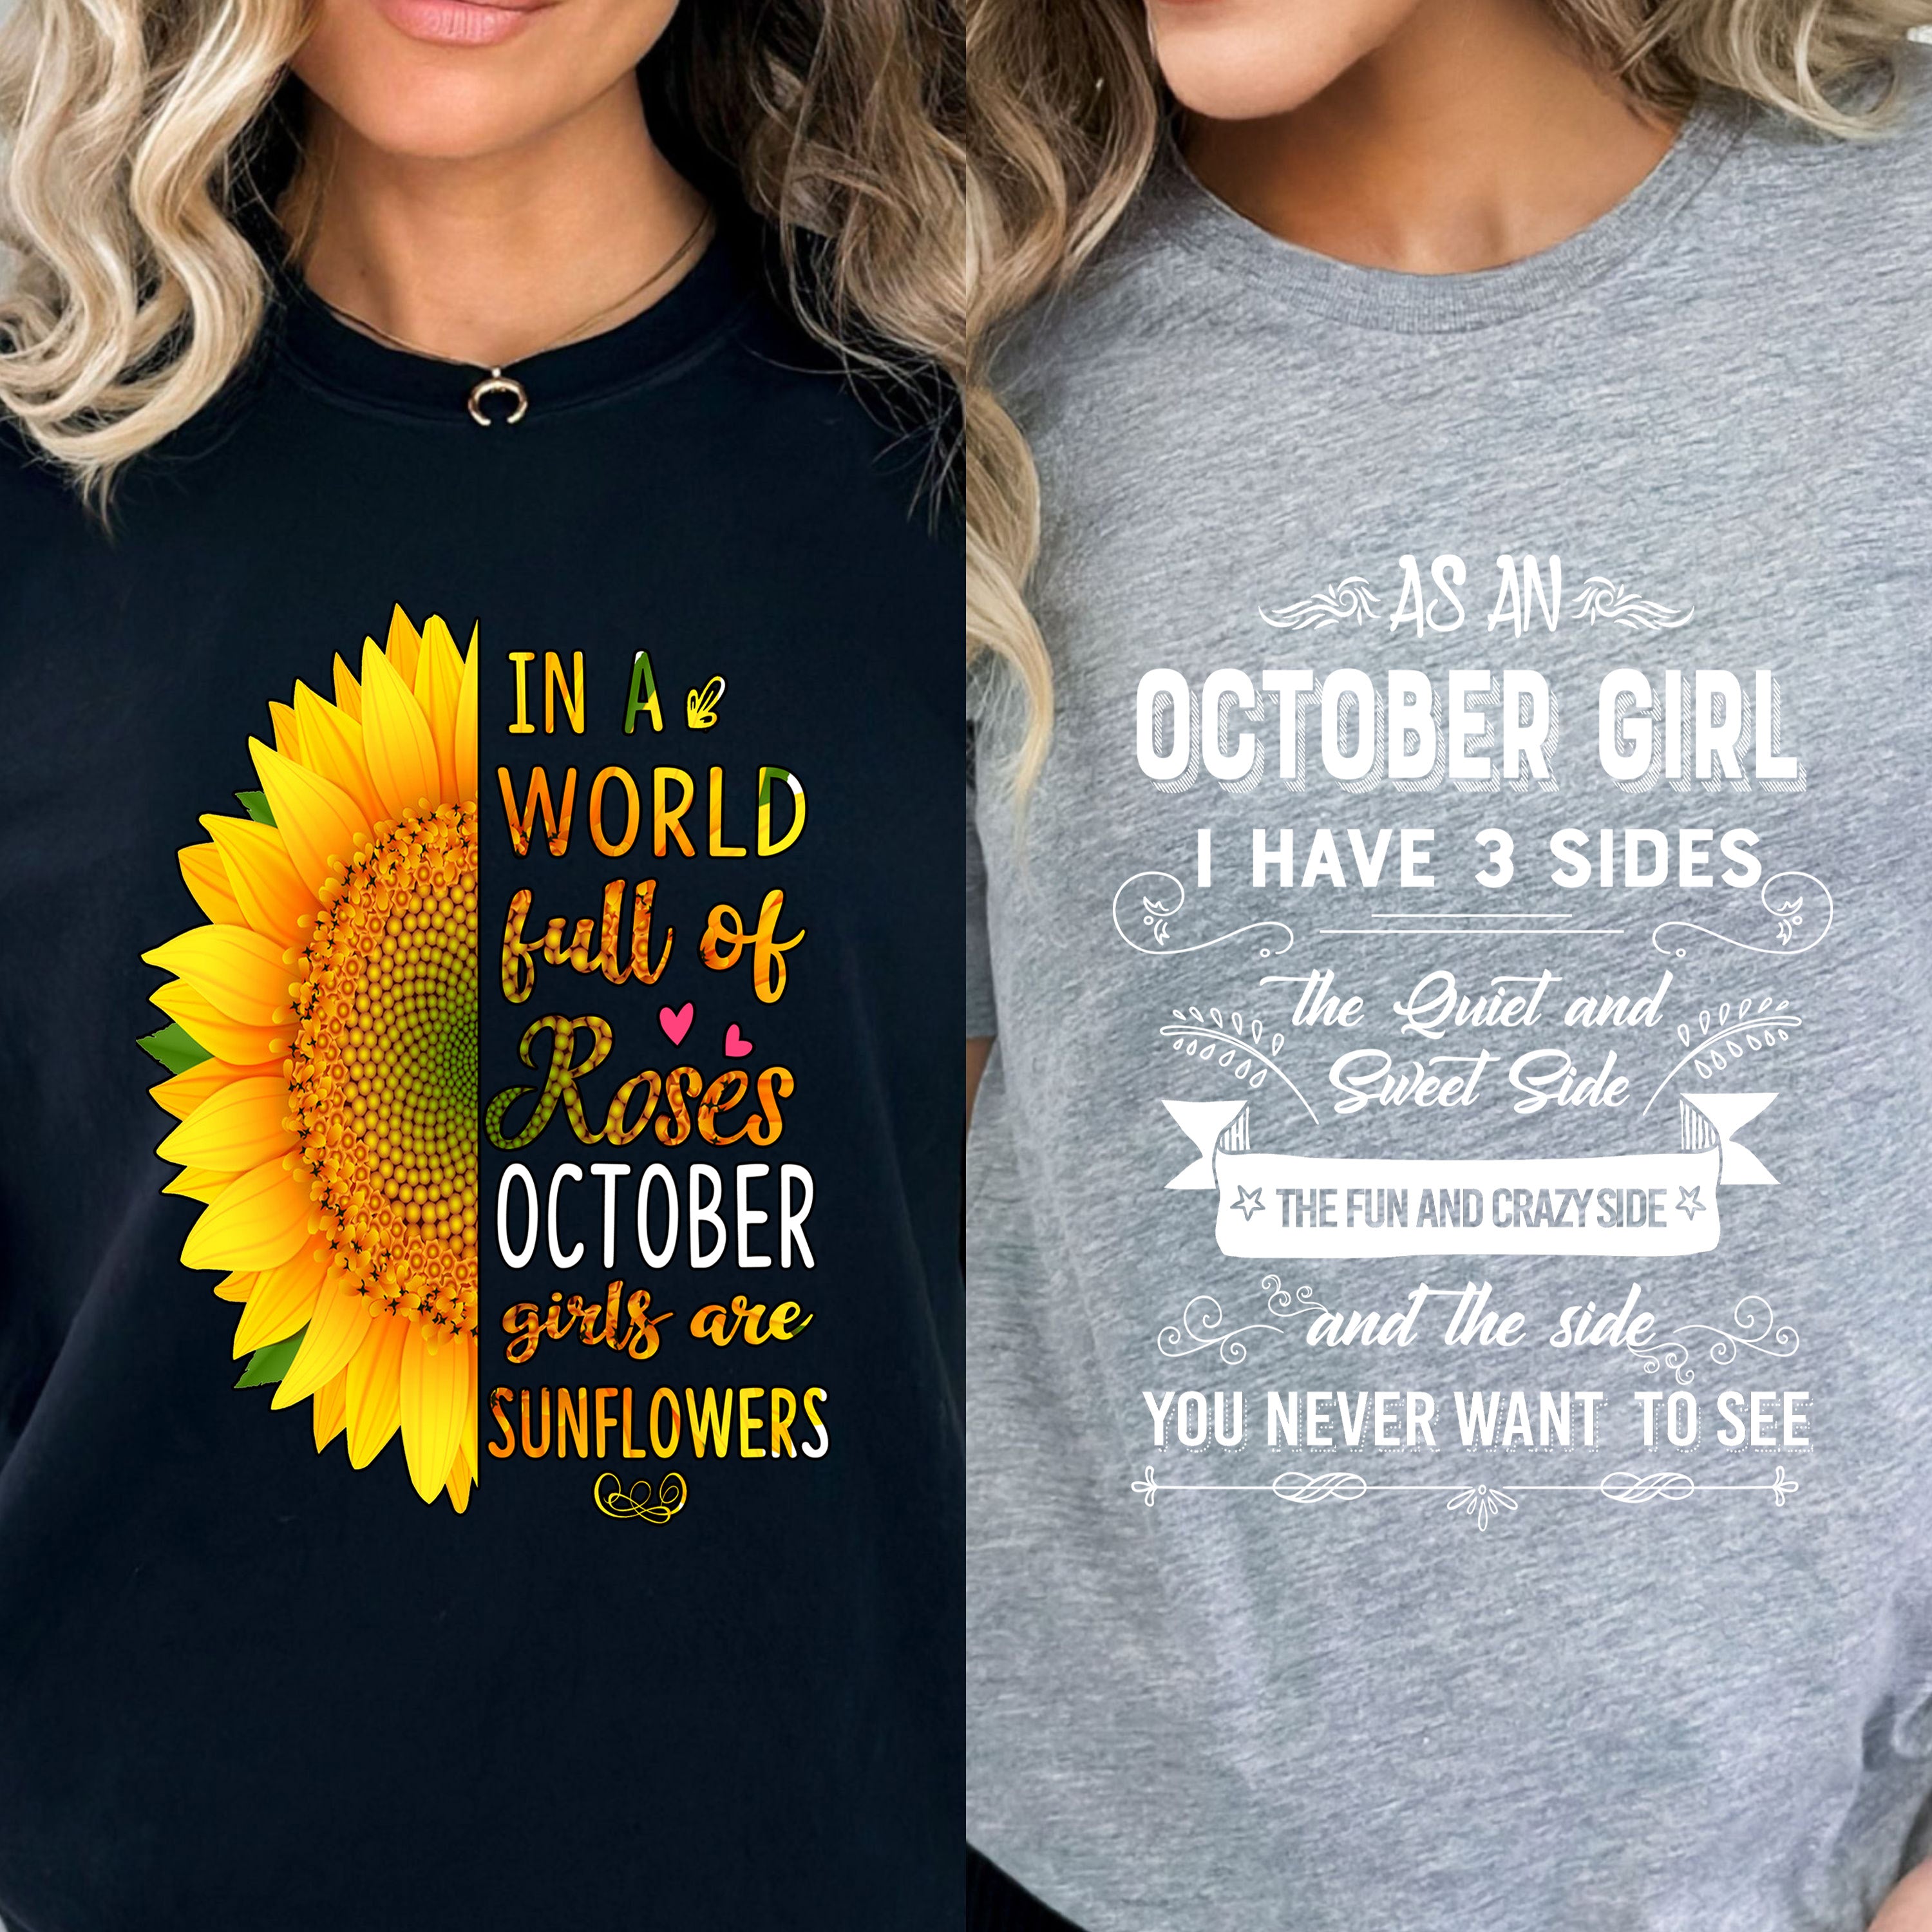 "October Combo (Sunflower And 3 Sides)" Pack of 2 Shirts